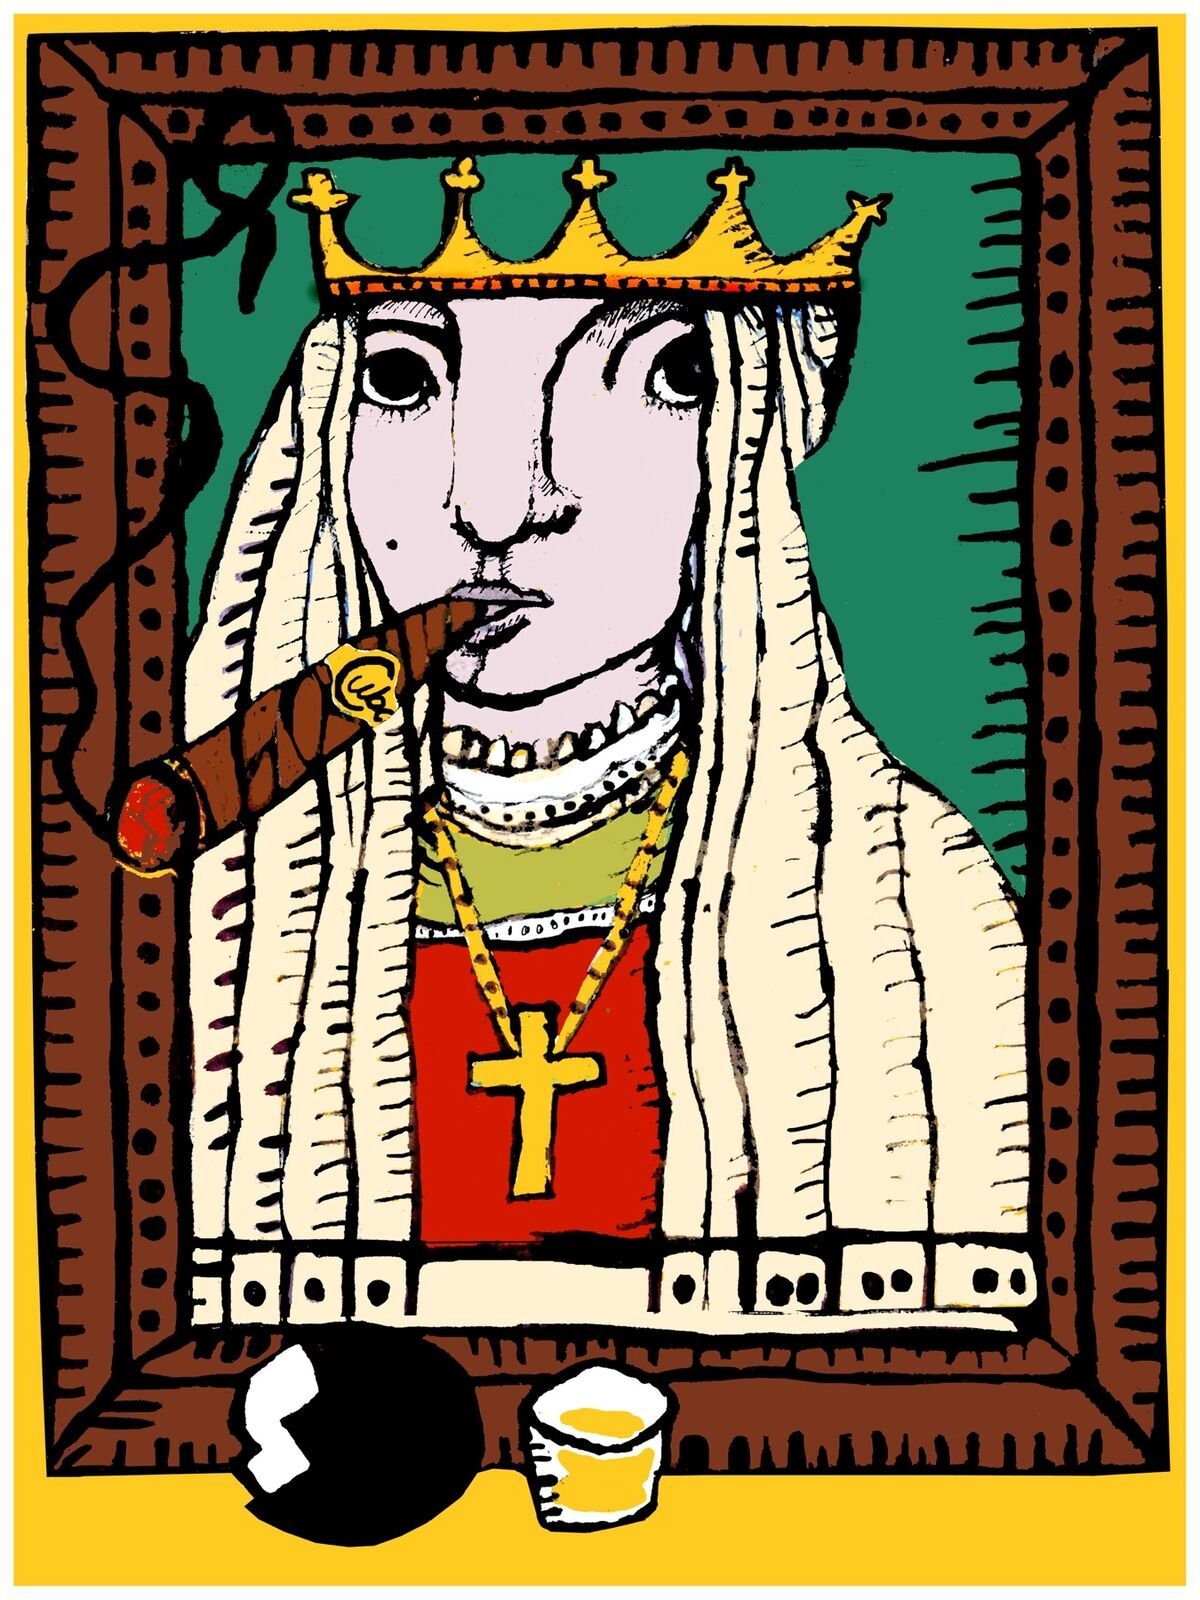 1946.Religious queen smokes cuban cigar painting vintage Poster.Decorative Art. - $16.20 - $54.00